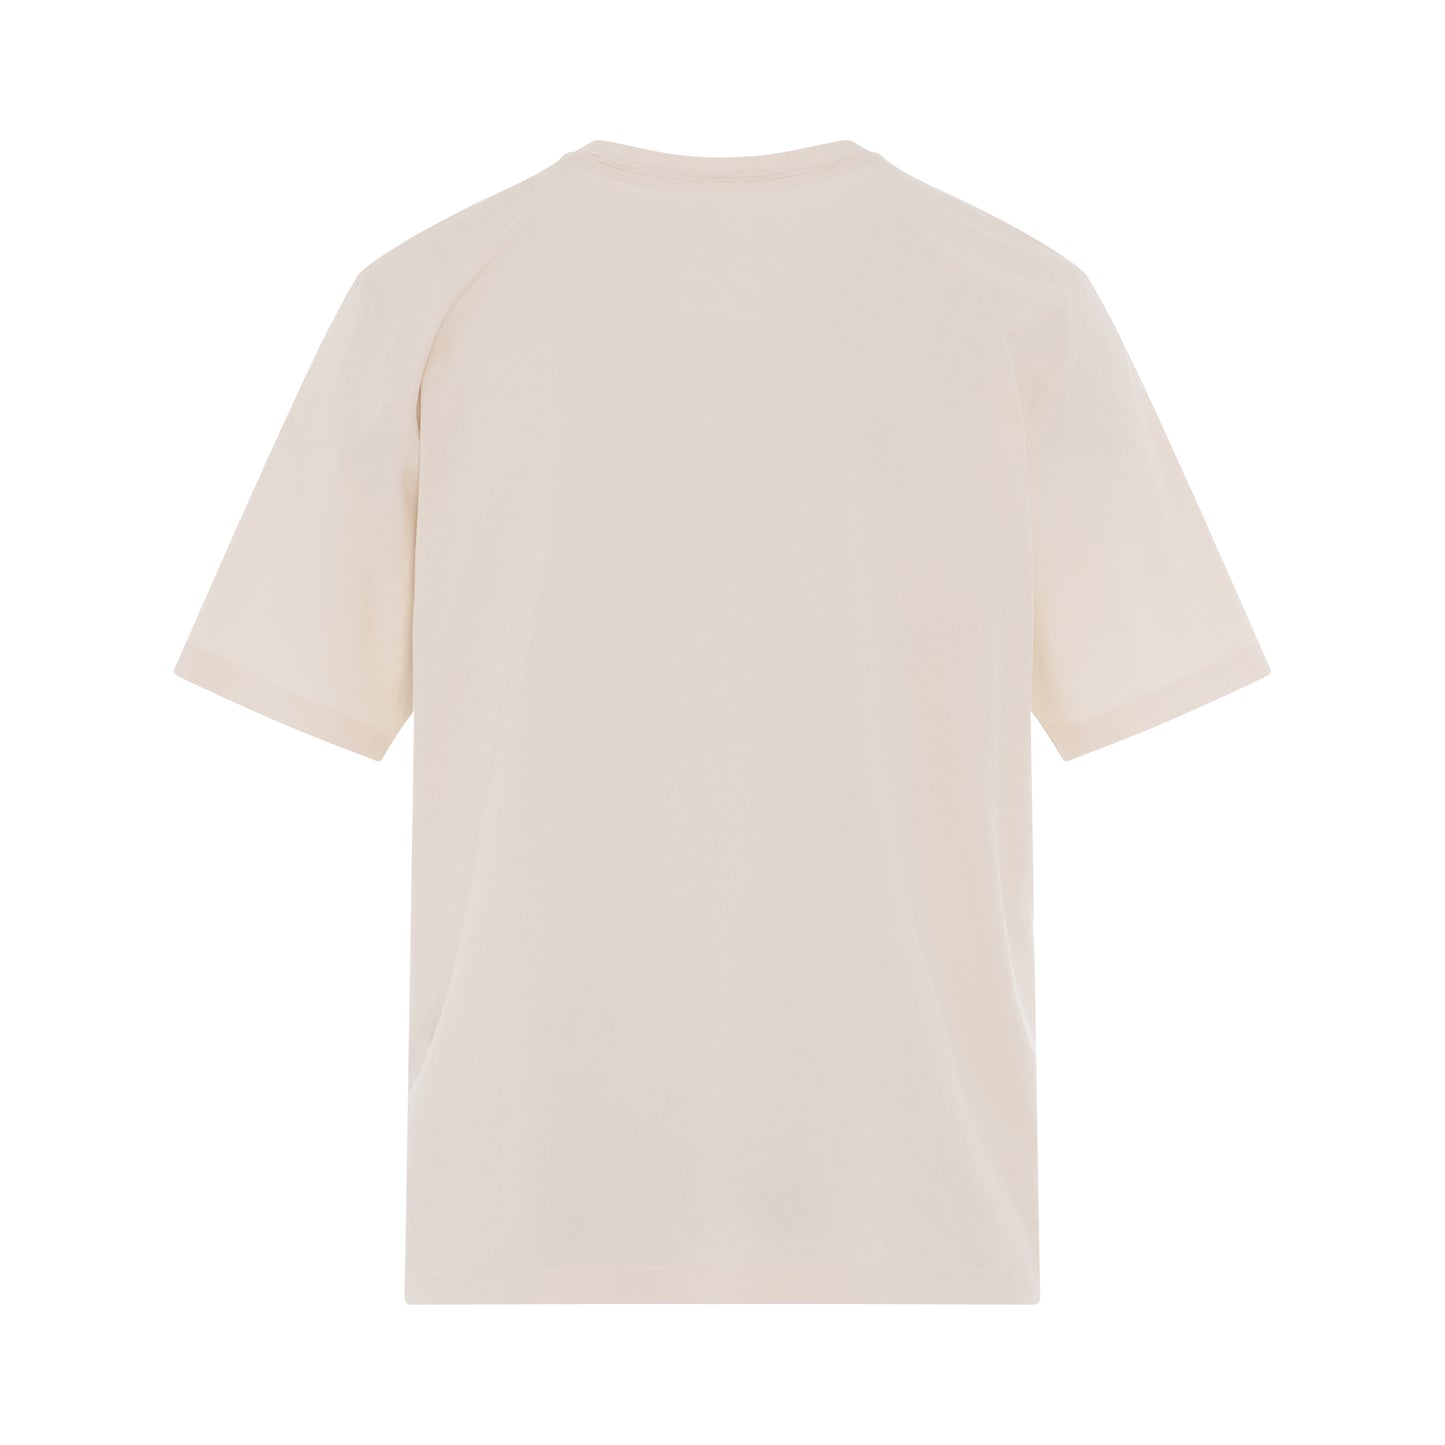 CTNMB T-Shirt in Off White